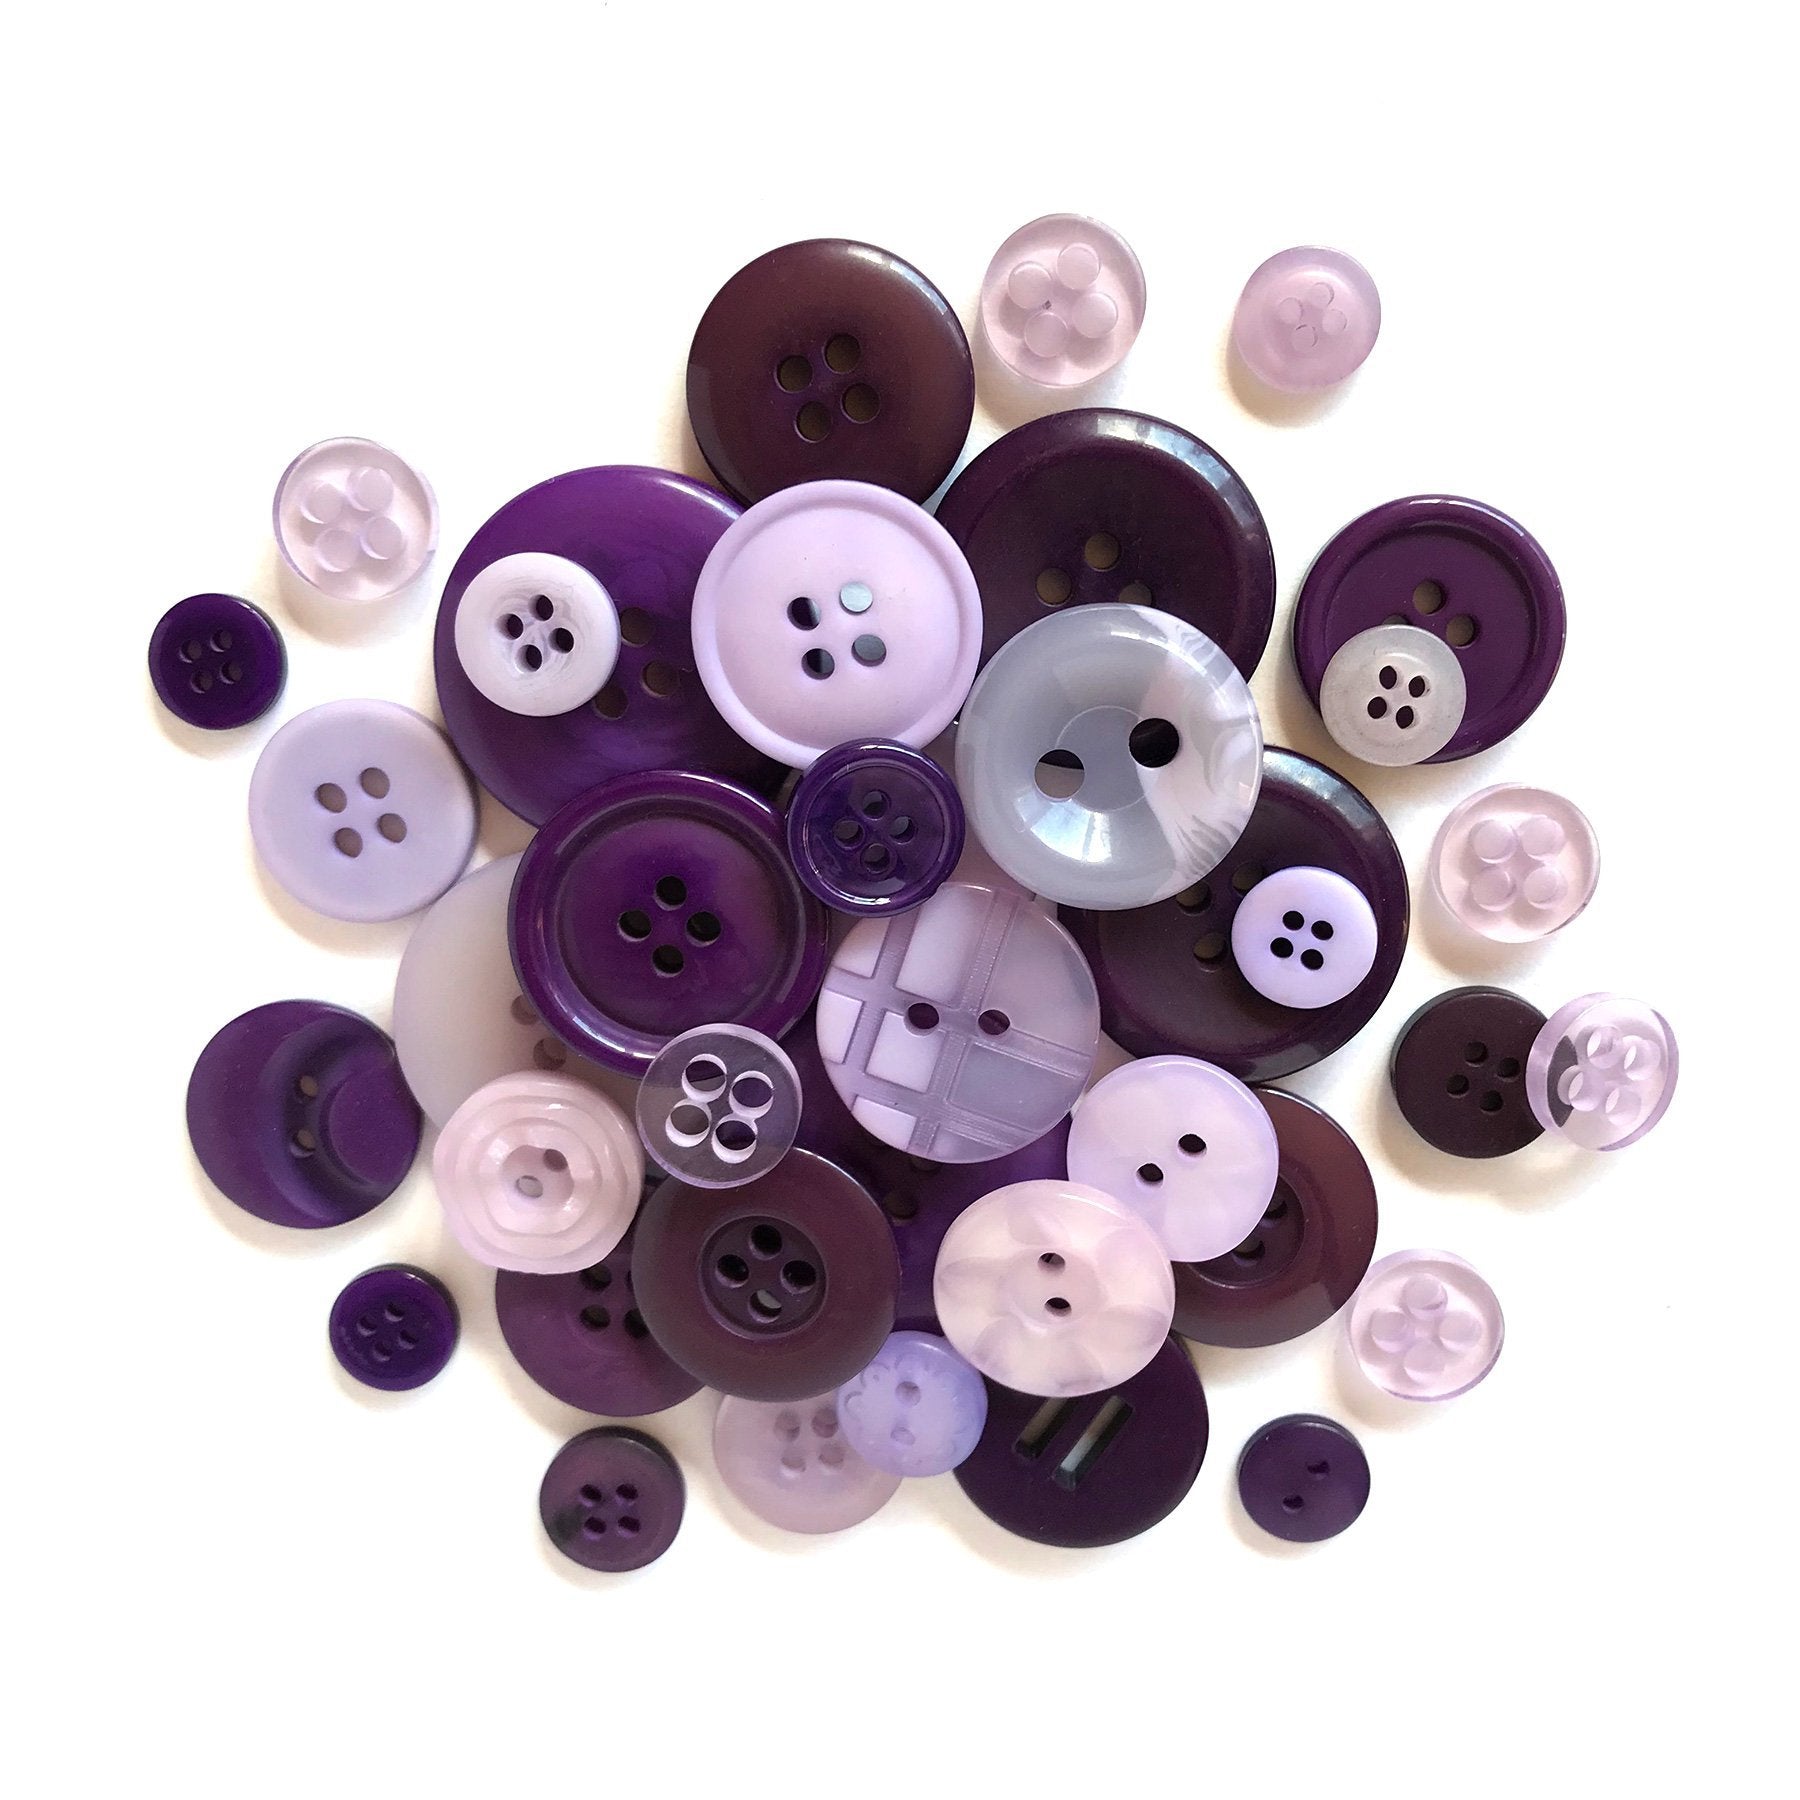 100 Clear Buttons, Clear Red Buttons, Assorted sizes Buttons, Grab Bag,  Sewing, Crafting, Jewelry, Collect (AL 35)